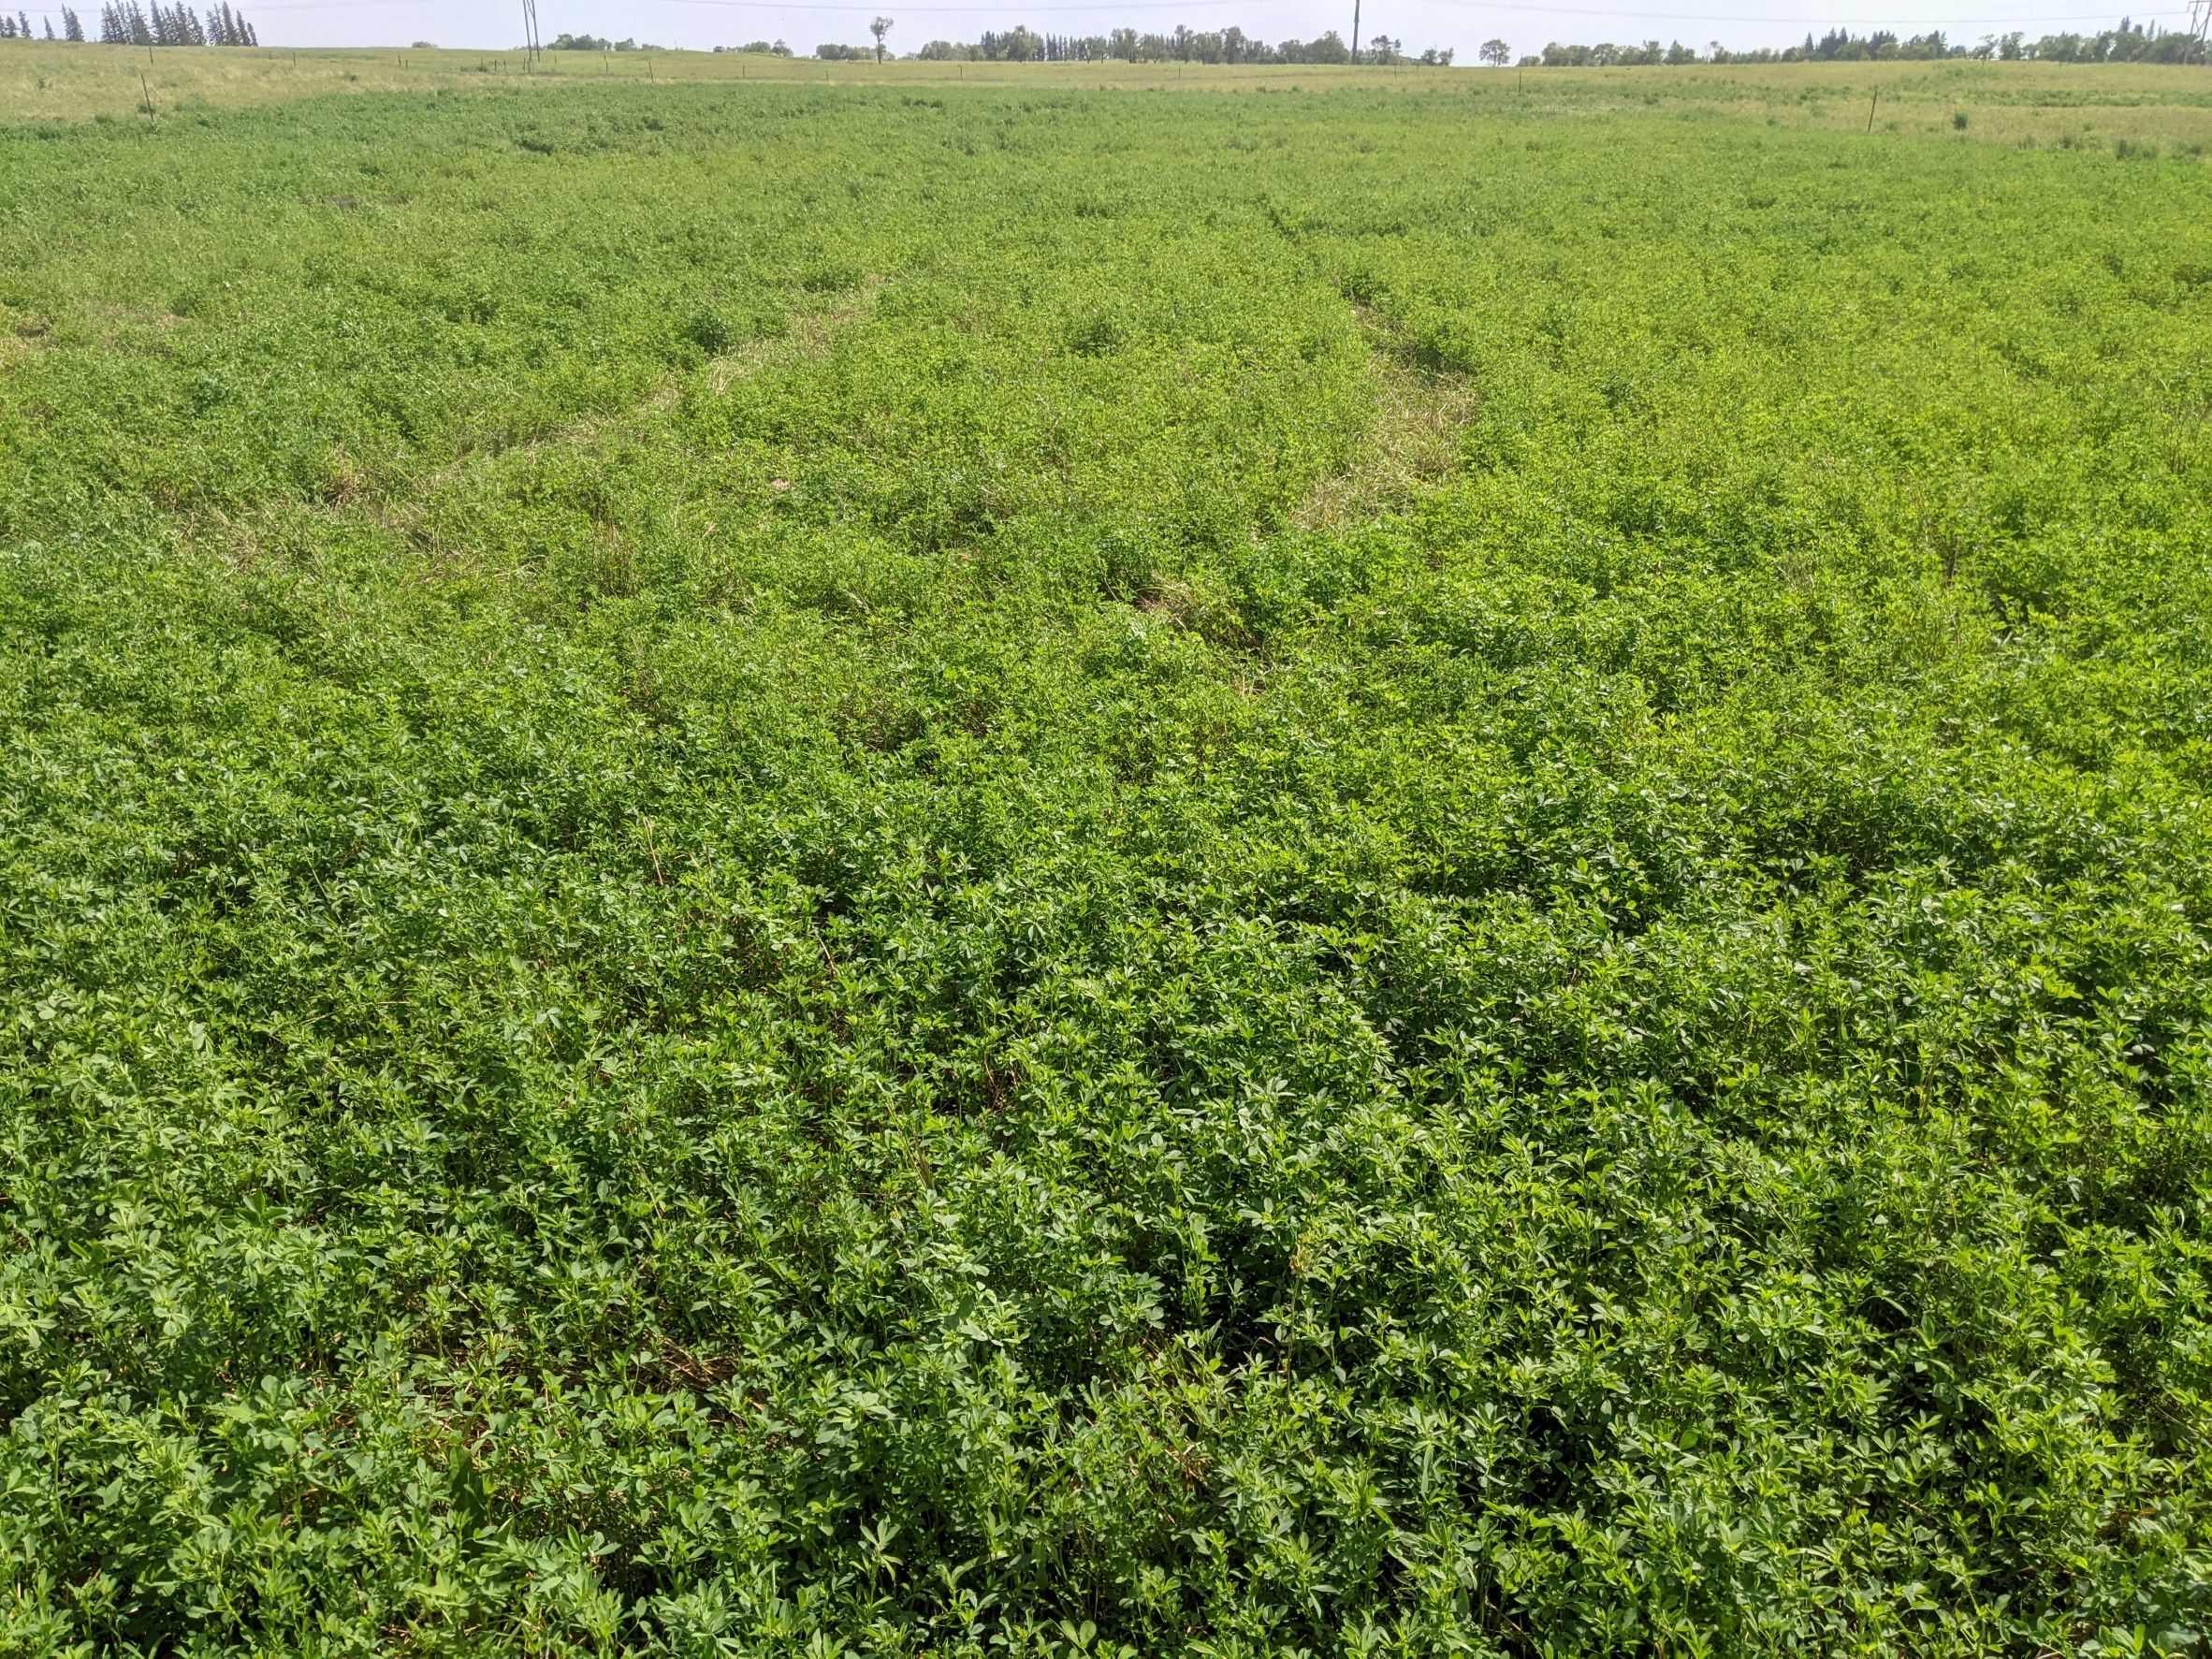 Alfalfa regrowth after grazing on a 2017 sod seeded plot